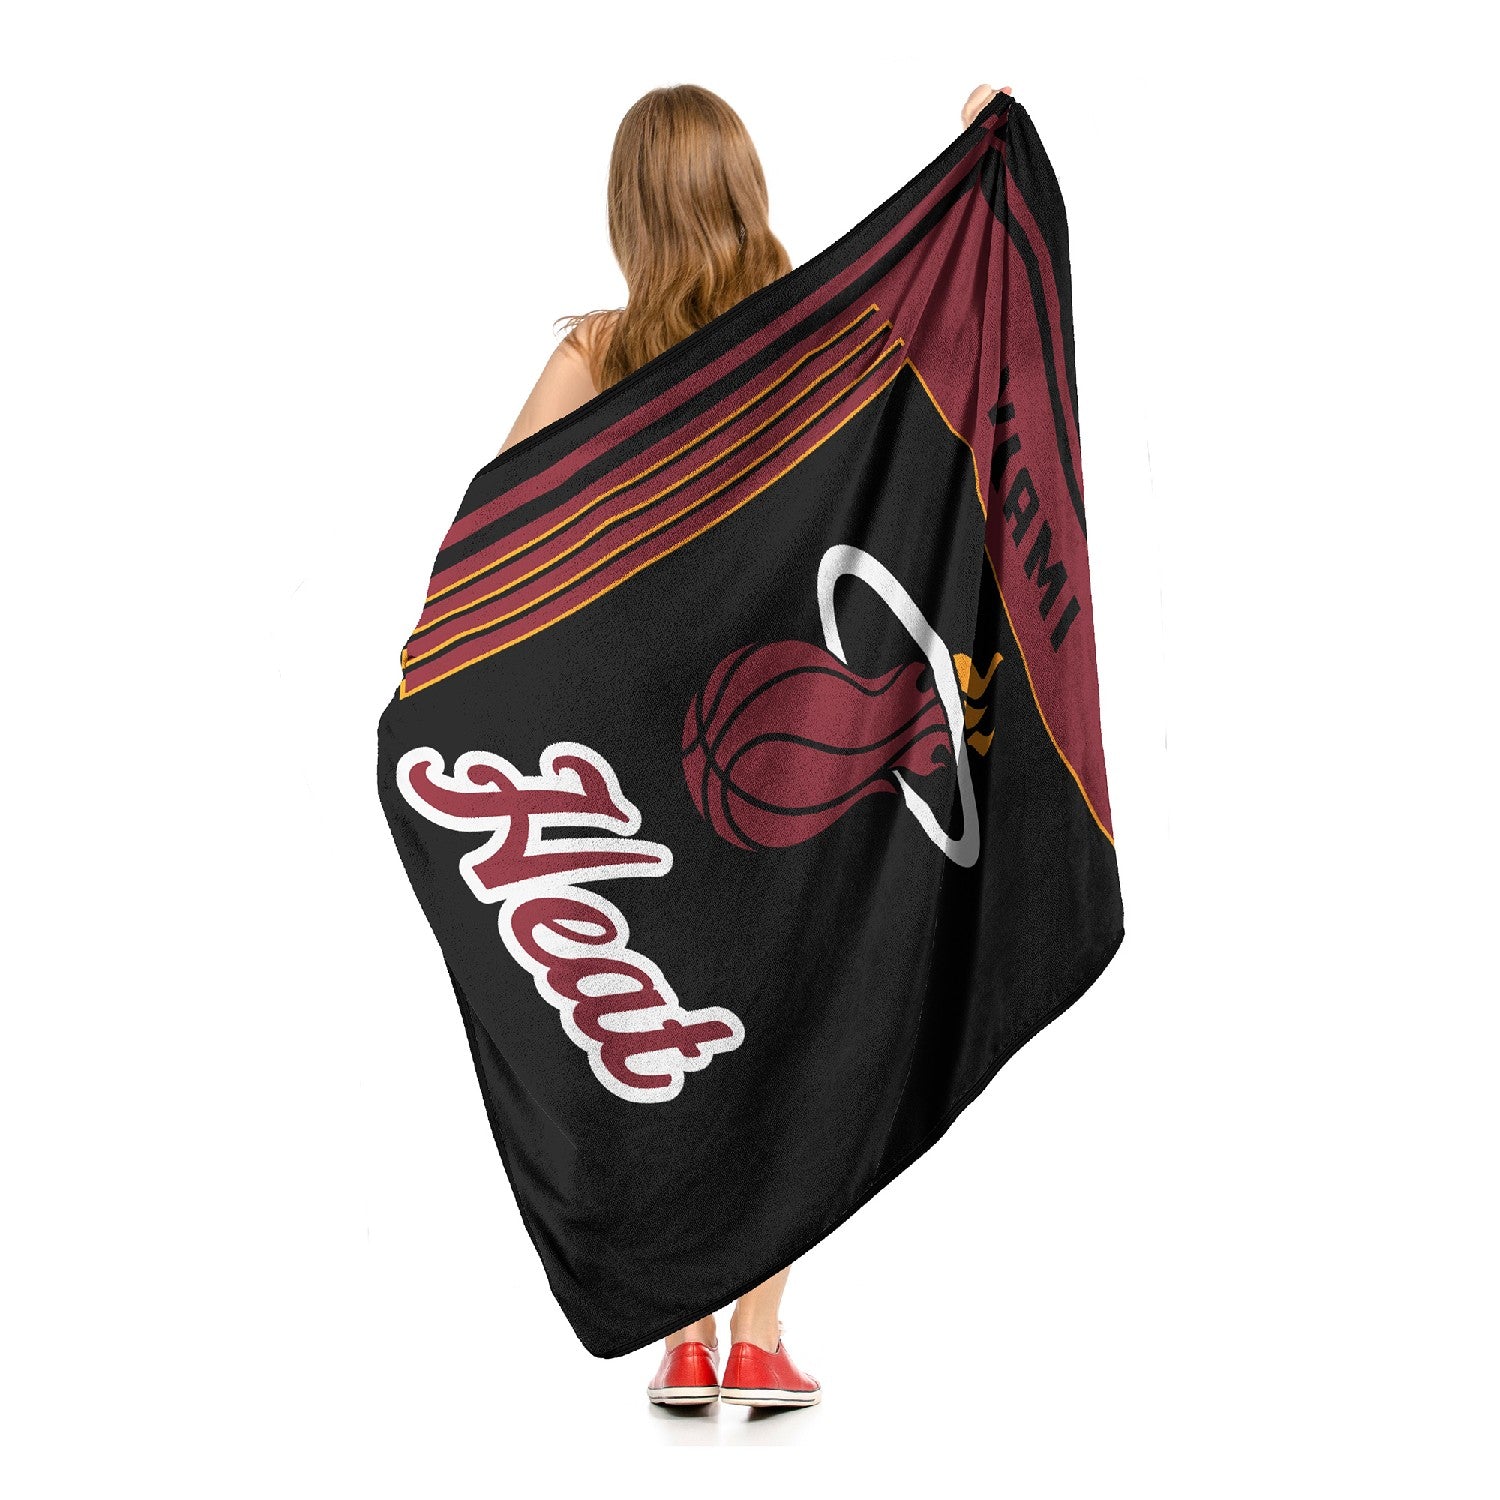 Miami Heat NBA Officially Licensed Throw Blanket 46x60